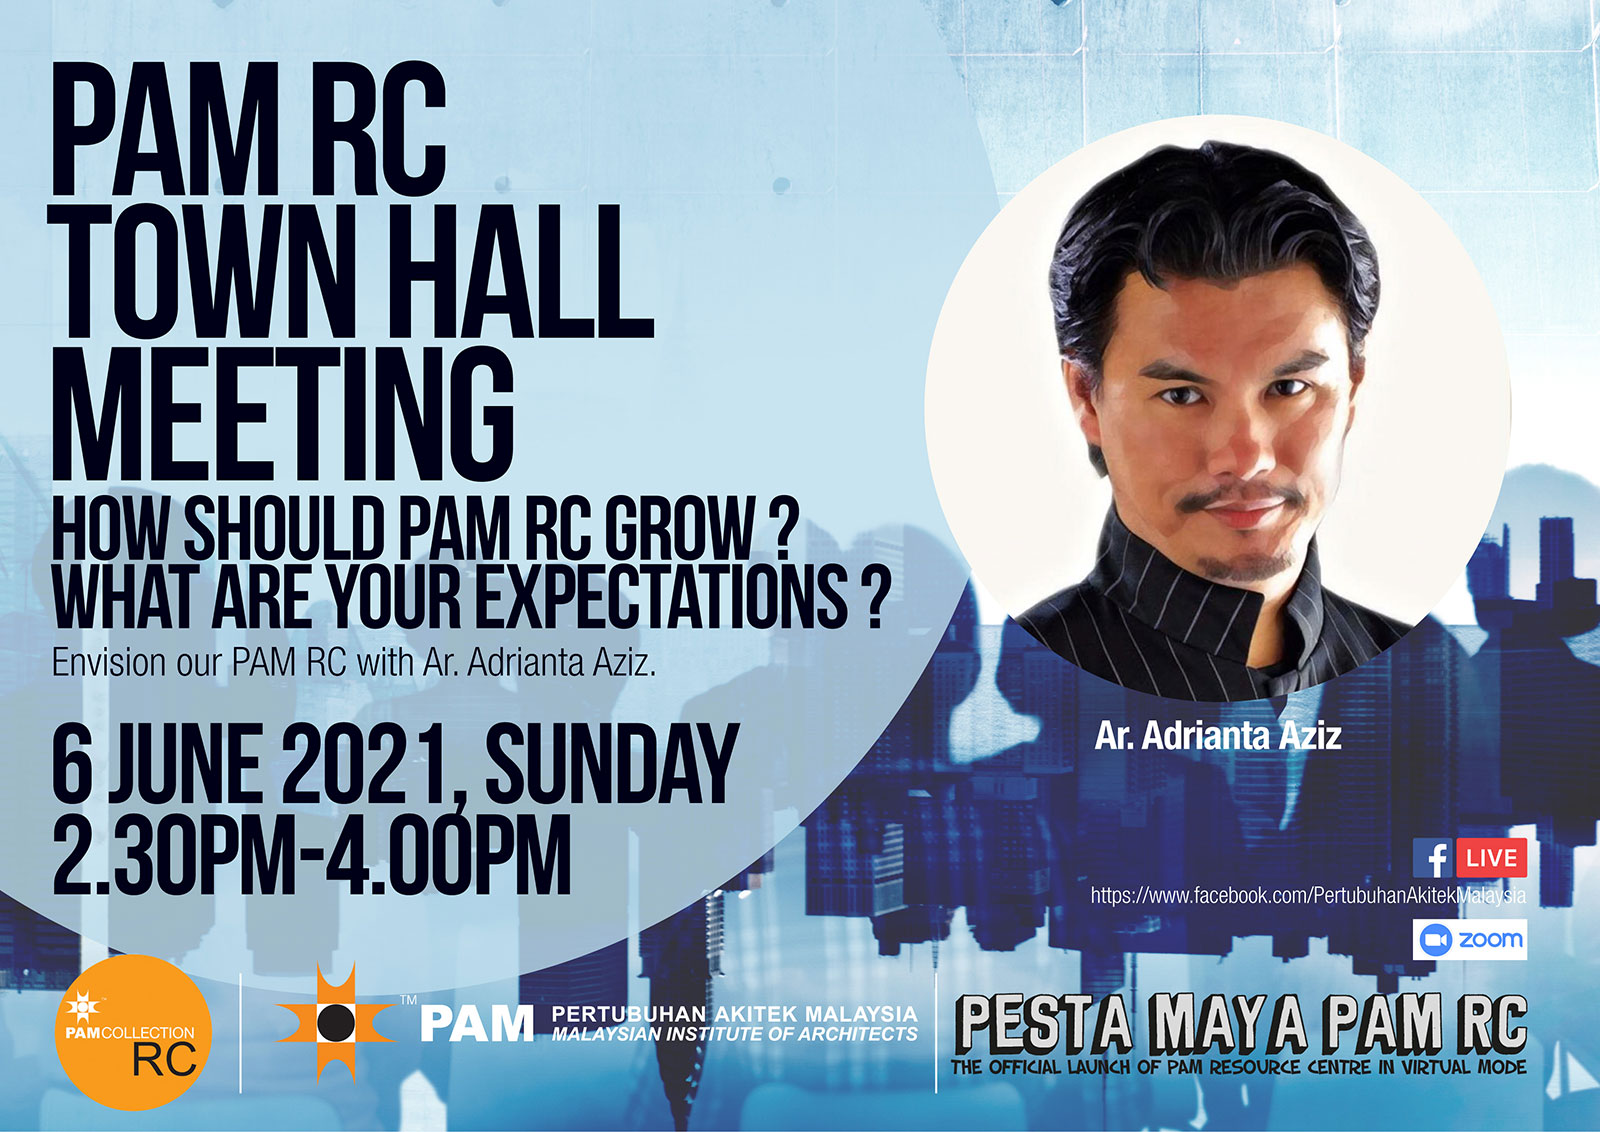 PAM RC Town Hall Meeting